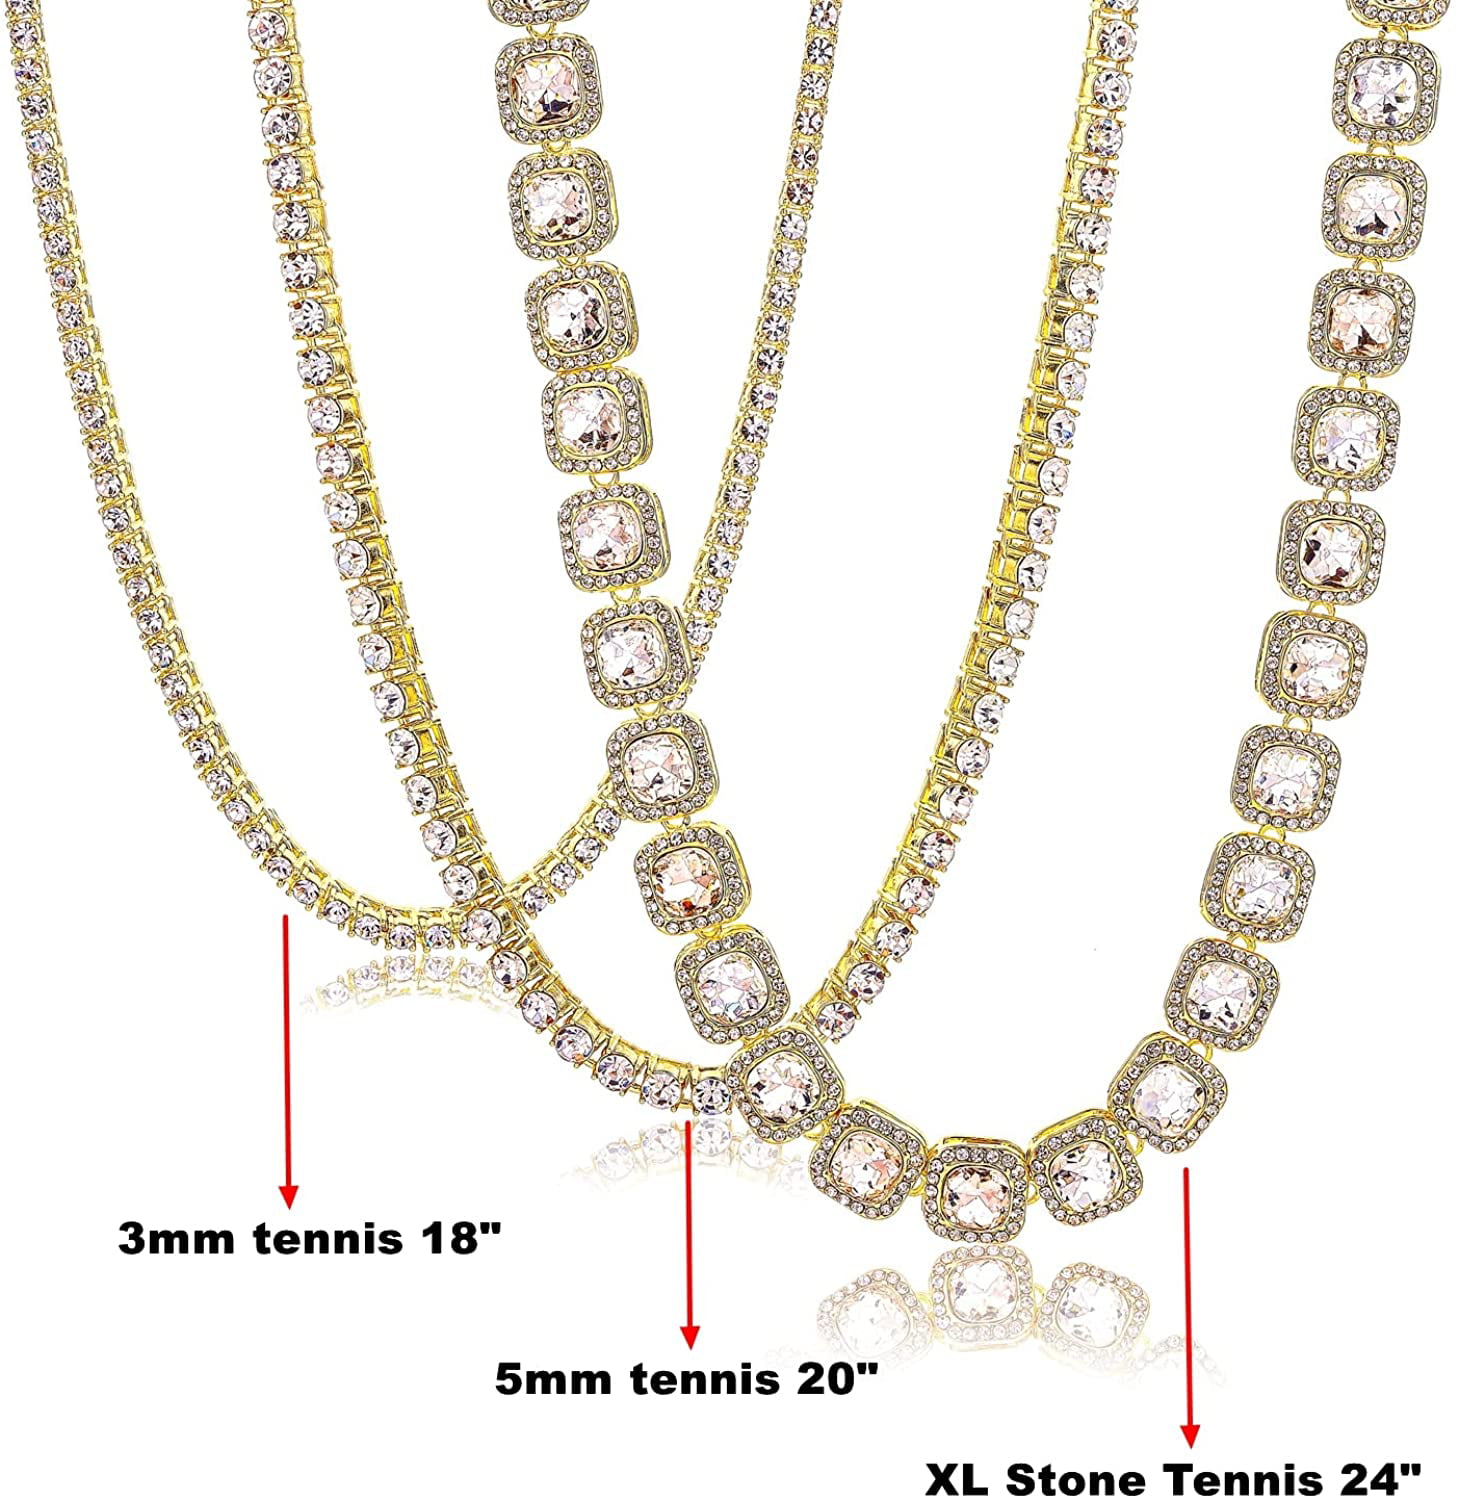 HH Bling Empire Gold Tennis and Cuban Link Chain for Thailand